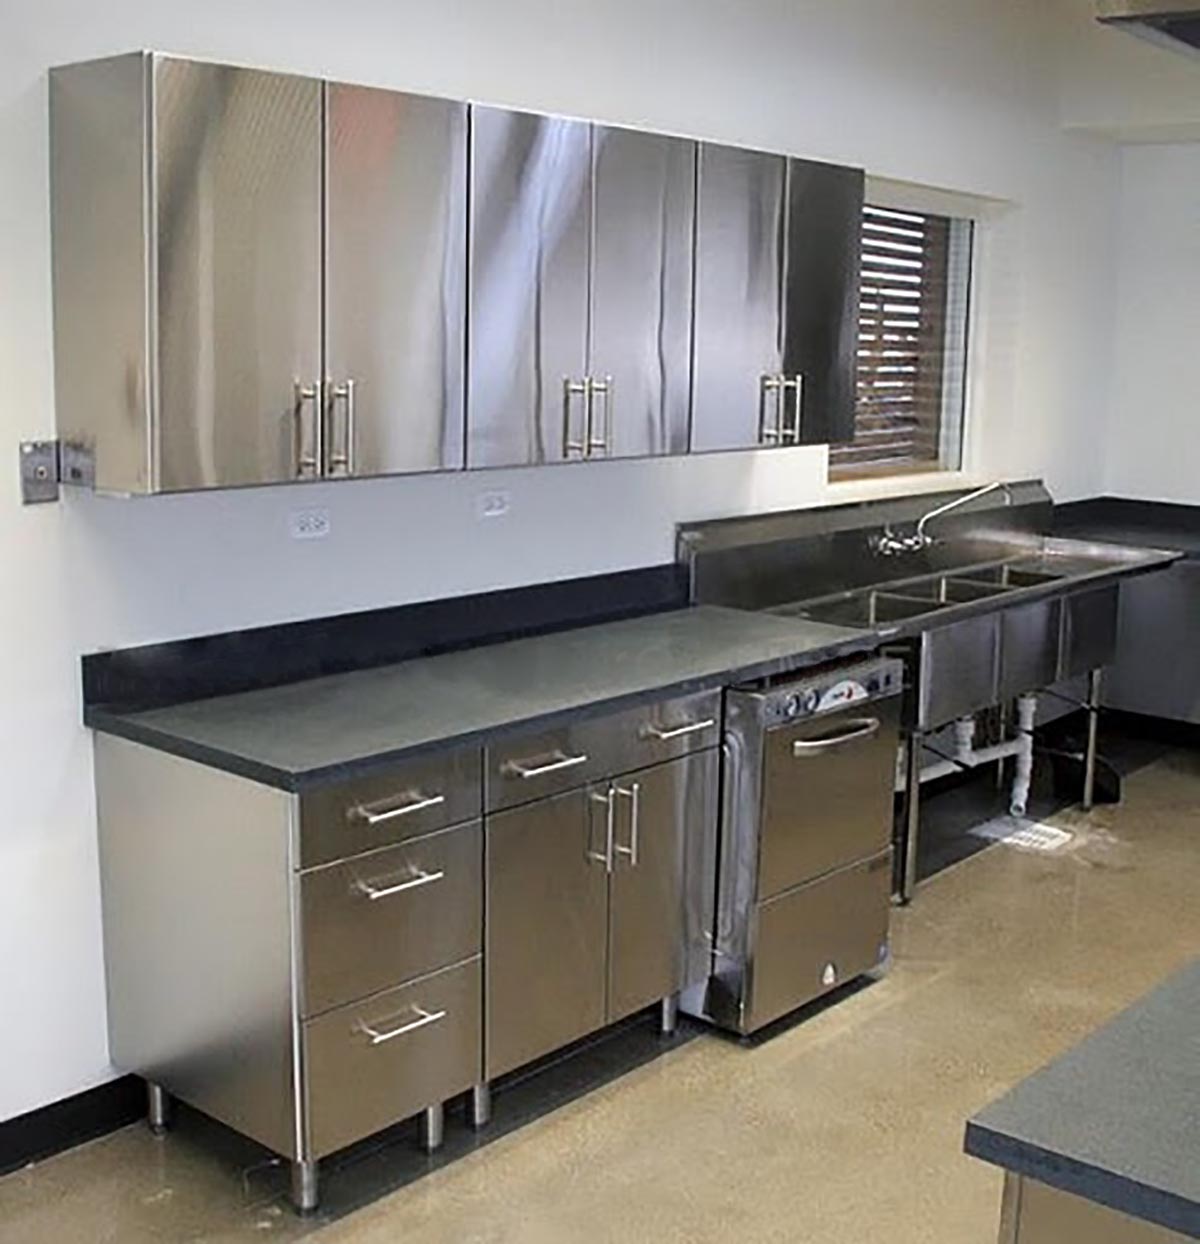 Stainless Steel commercial kitchen cabinets.